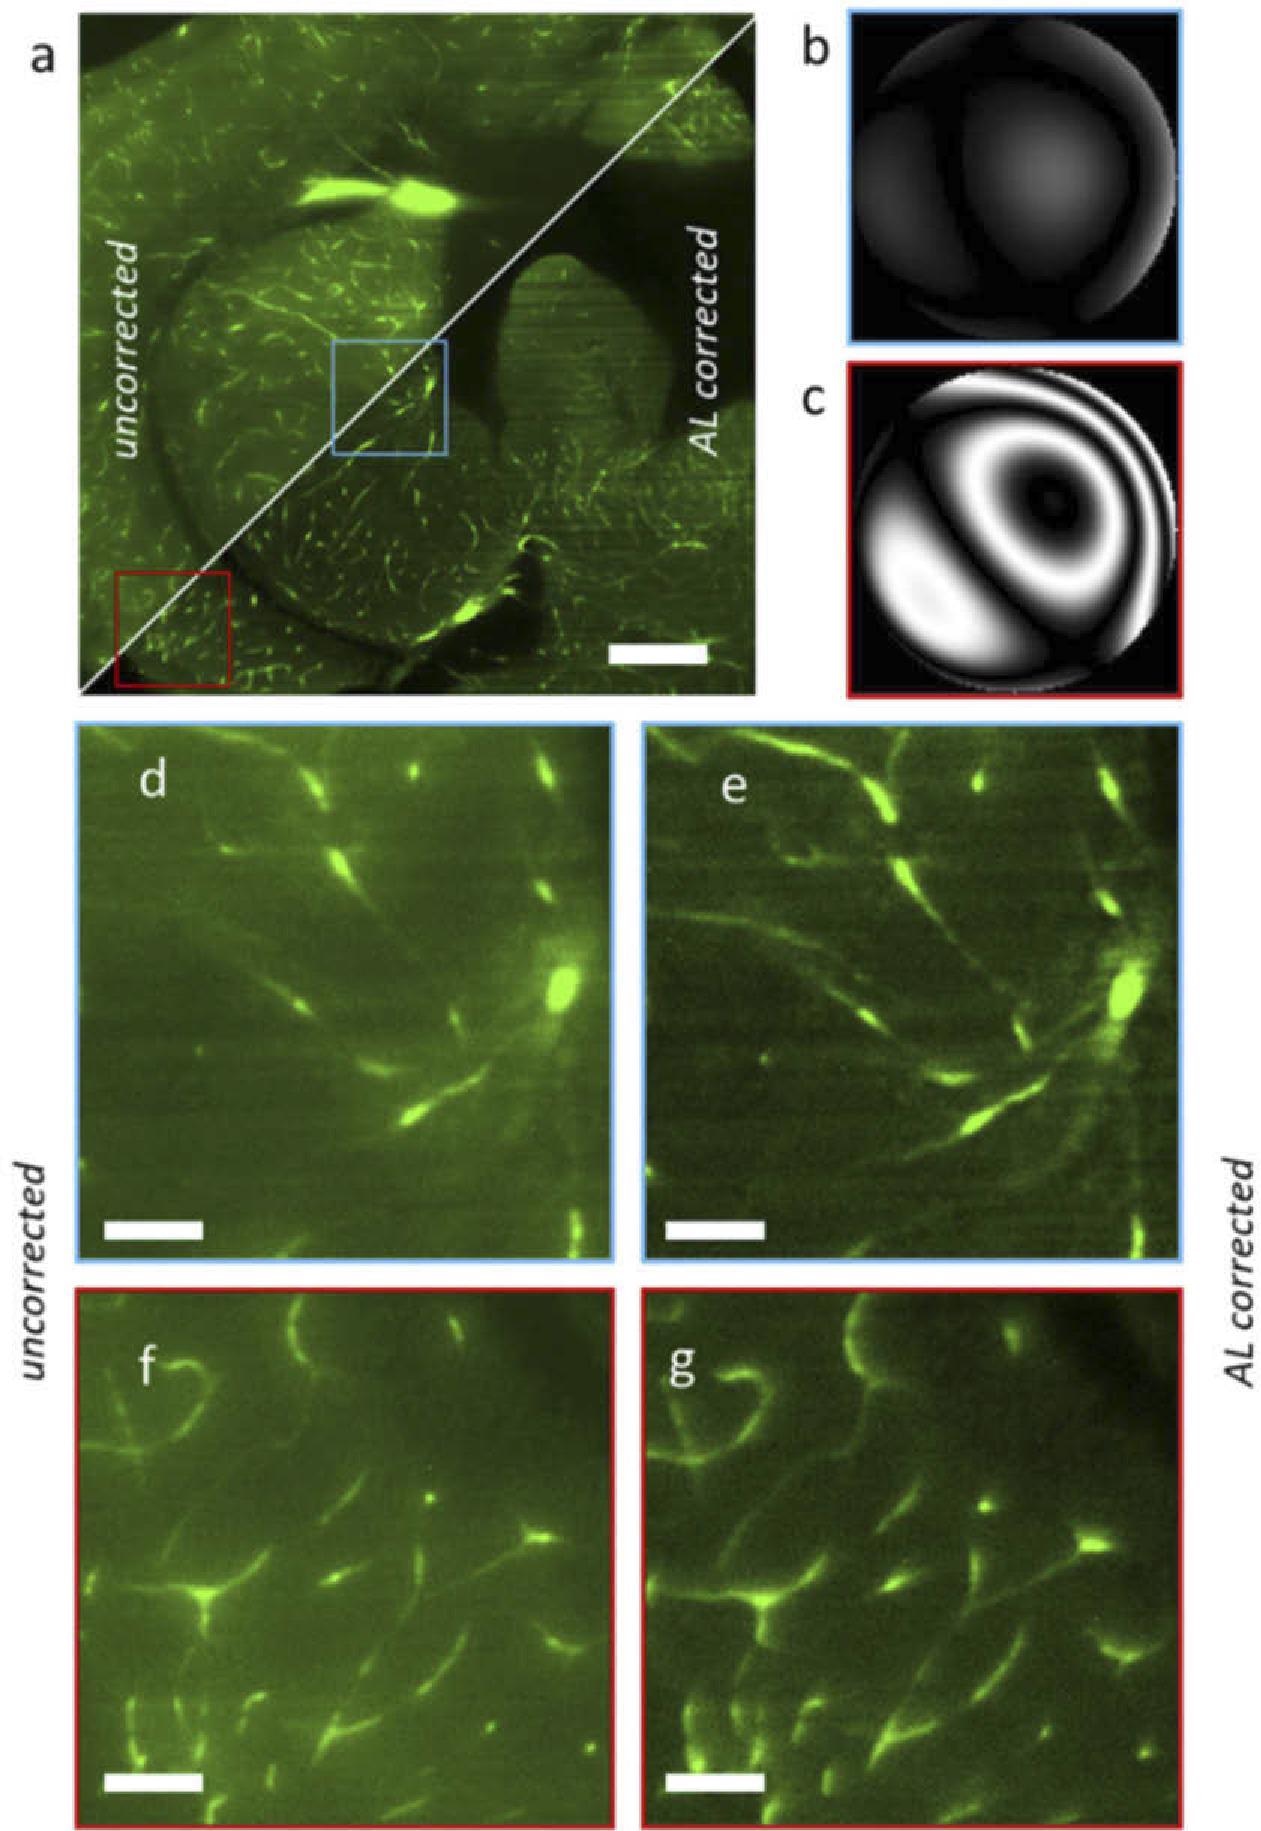 Light sheet microscopy acquisition of a chemically cleared adult zebrafish brain section, without and with AL correction. (a) Full image uncorrected (top-left triangle) vs corrected with the adaptive lens (bottom-right). (b) Wavefront aberration in the central region (blue in panel a). (c) Wavefront aberration at the left-bottom concern (red). (d-g) Magnified regions uncorrected (d, f) and corrected with the adaptive lens (e, g). Scalebar is 200 µm in a and 40 µm in b.